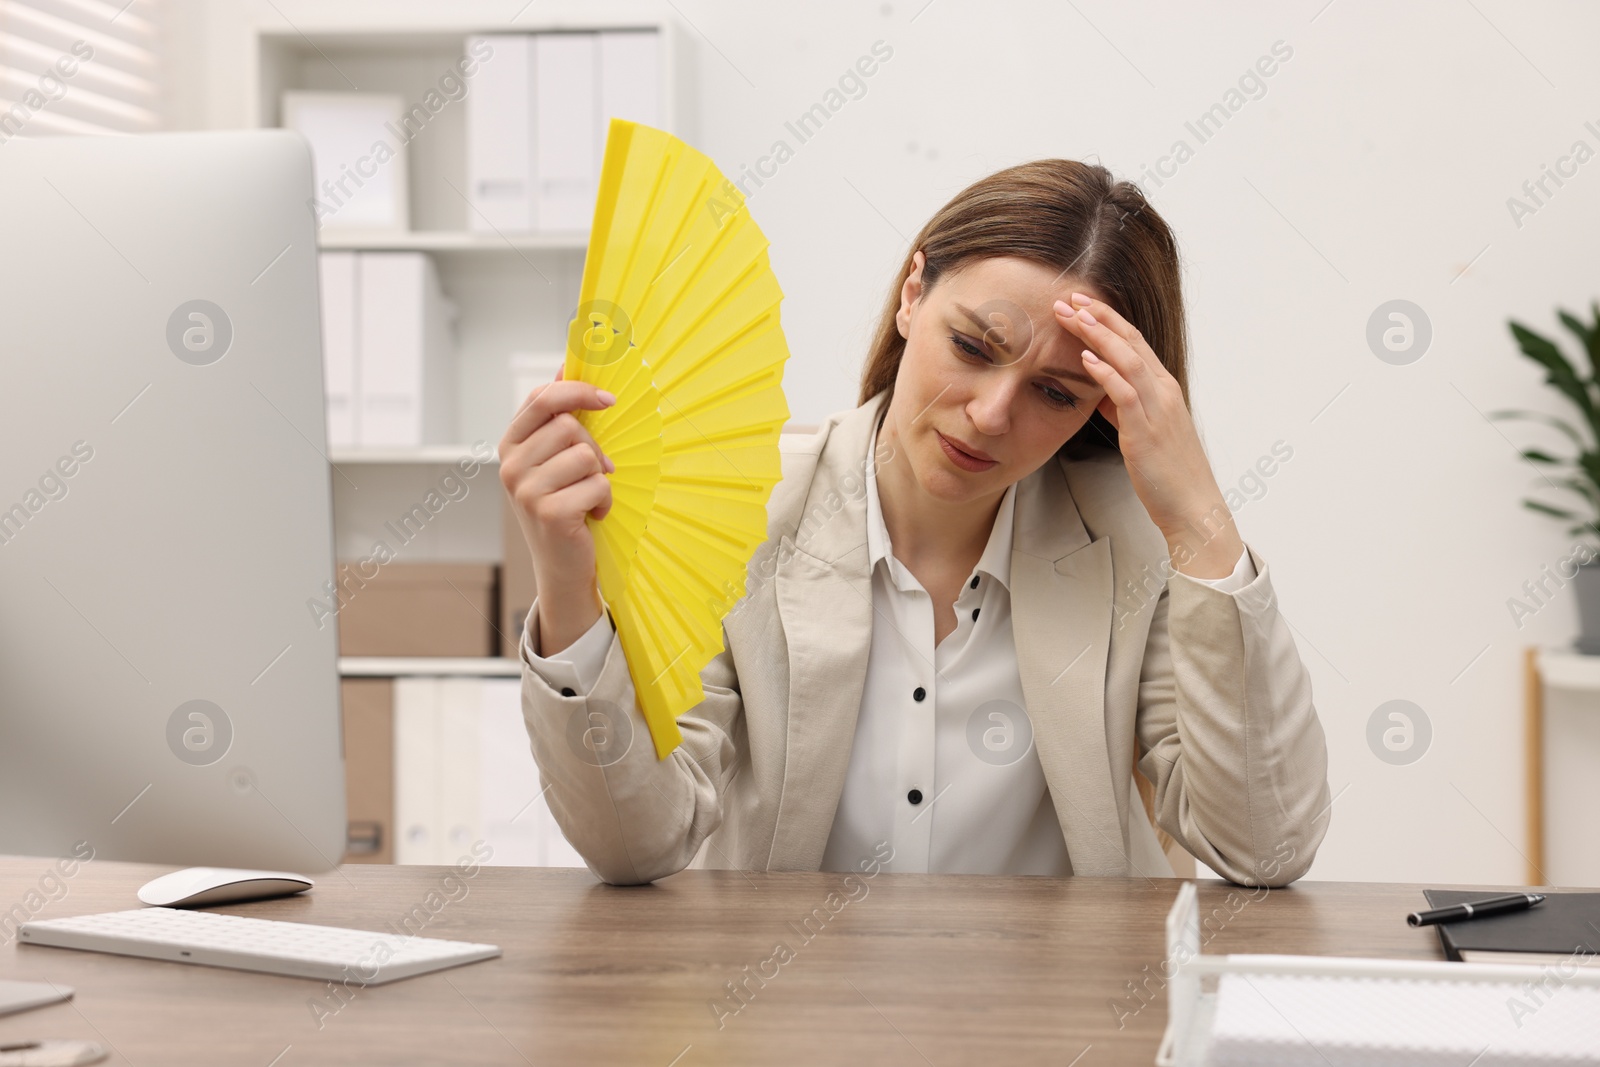 Photo of Businesswoman waving yellow hand fan to cool herself at table in office